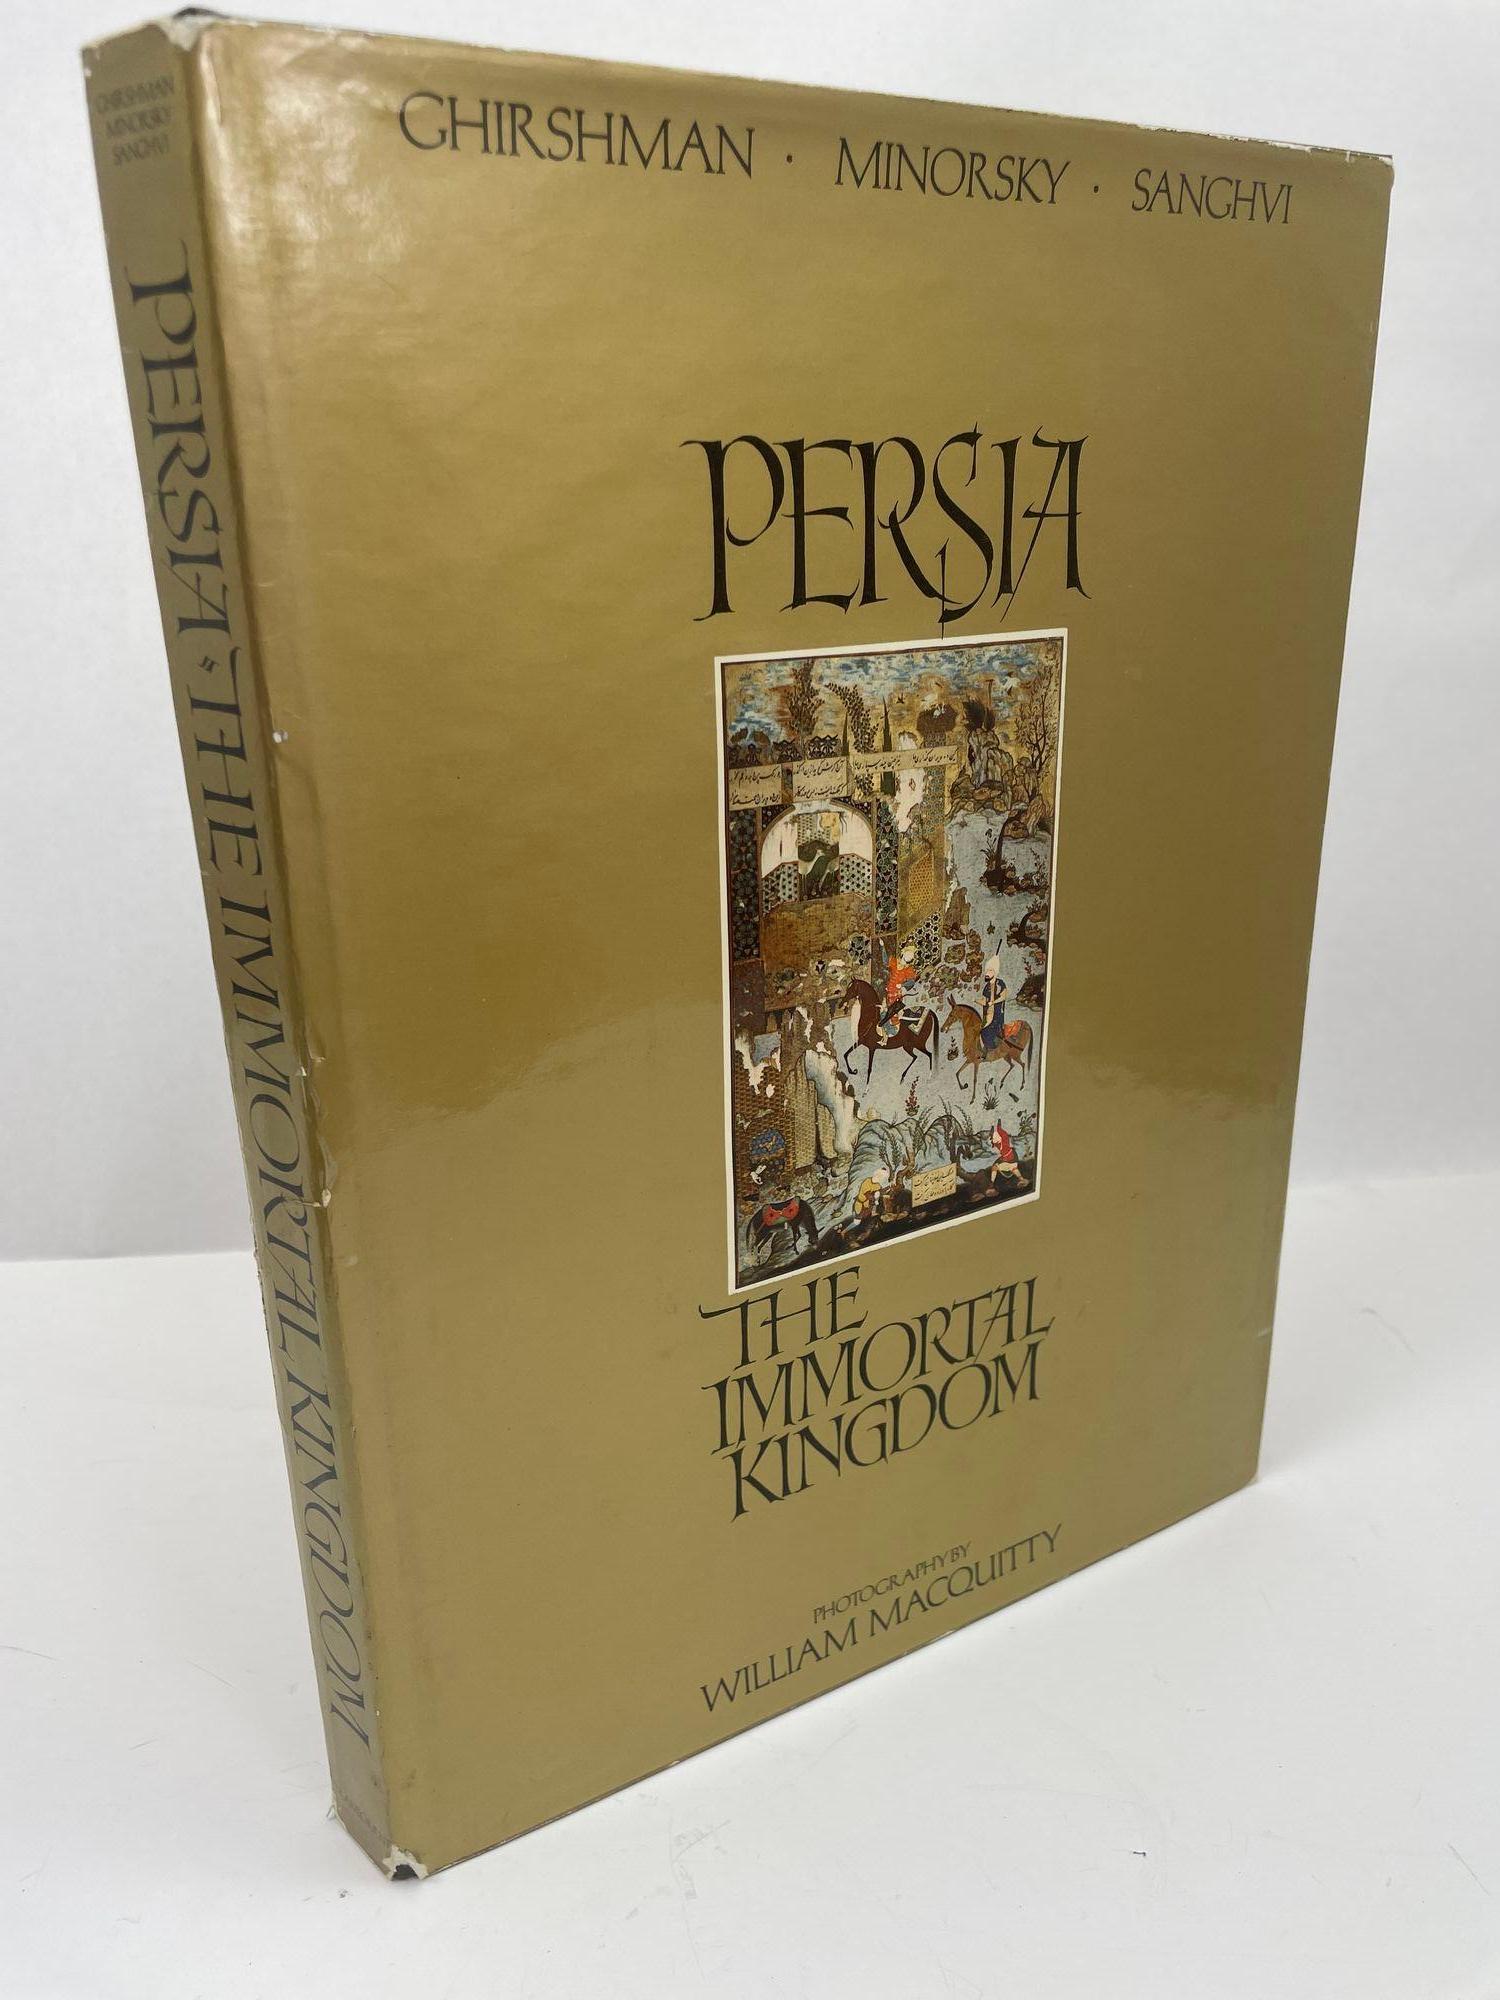 Paper Persia The Immortal Kingdom by Ghirshman Minorsky Sanghvi 1971 For Sale